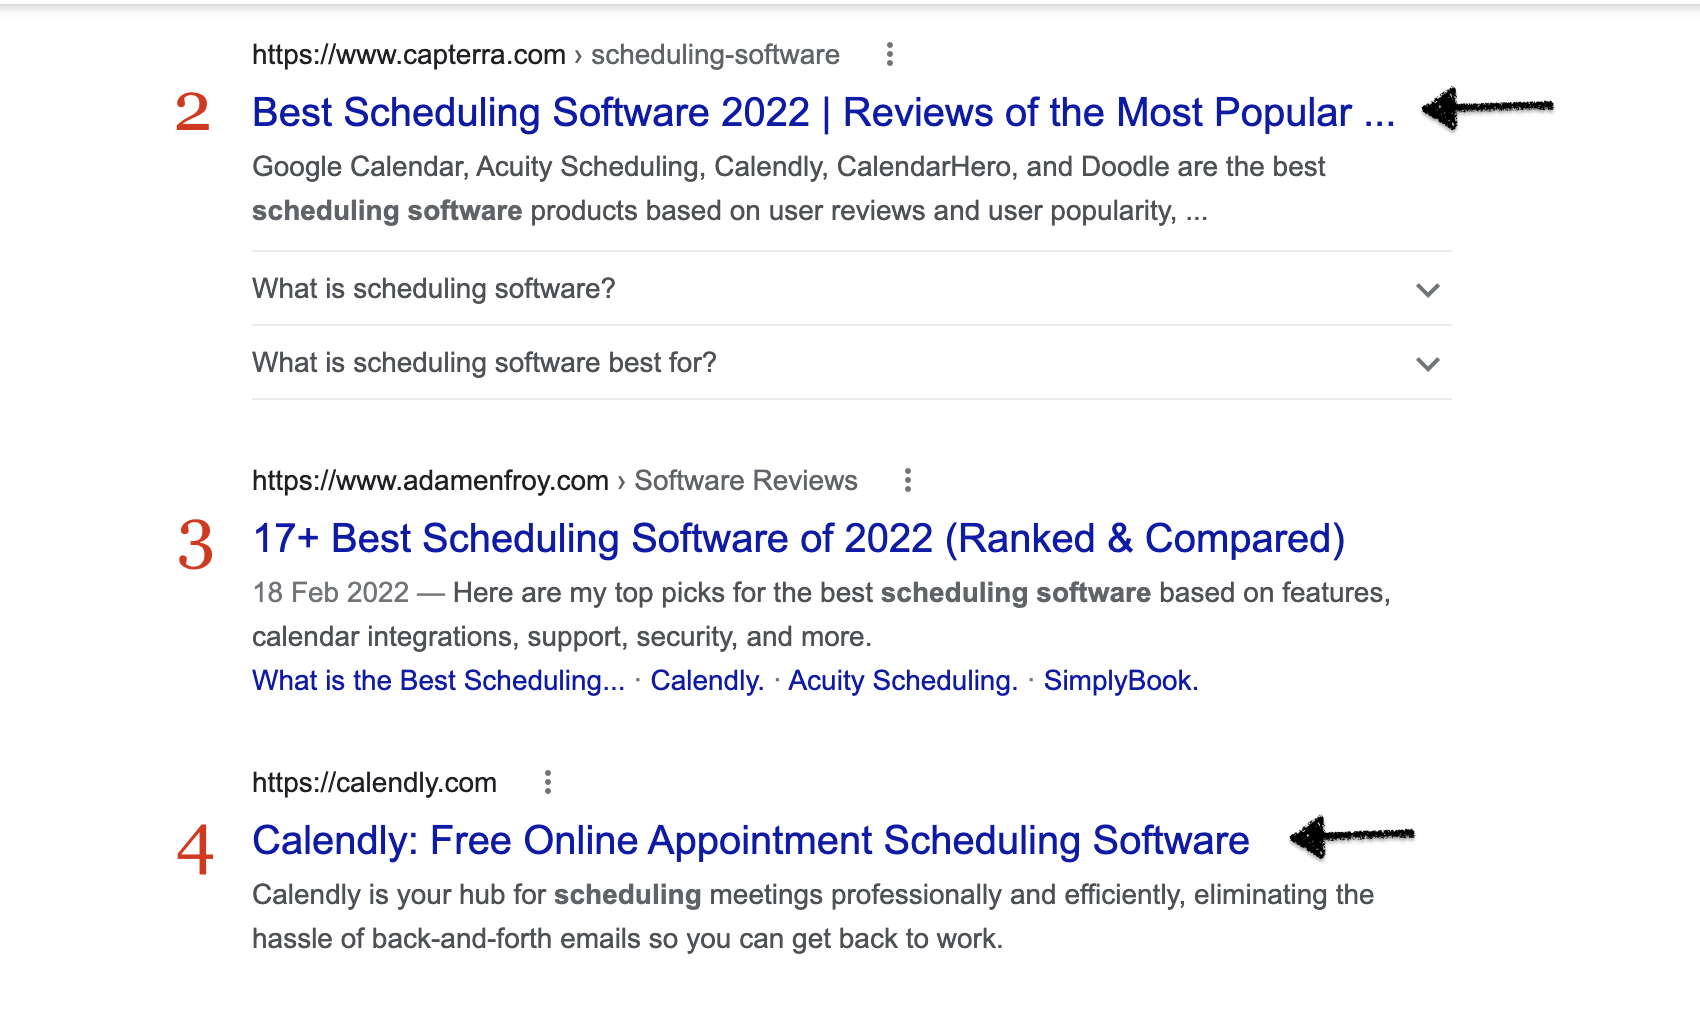 search engine results page for "scheduling software"